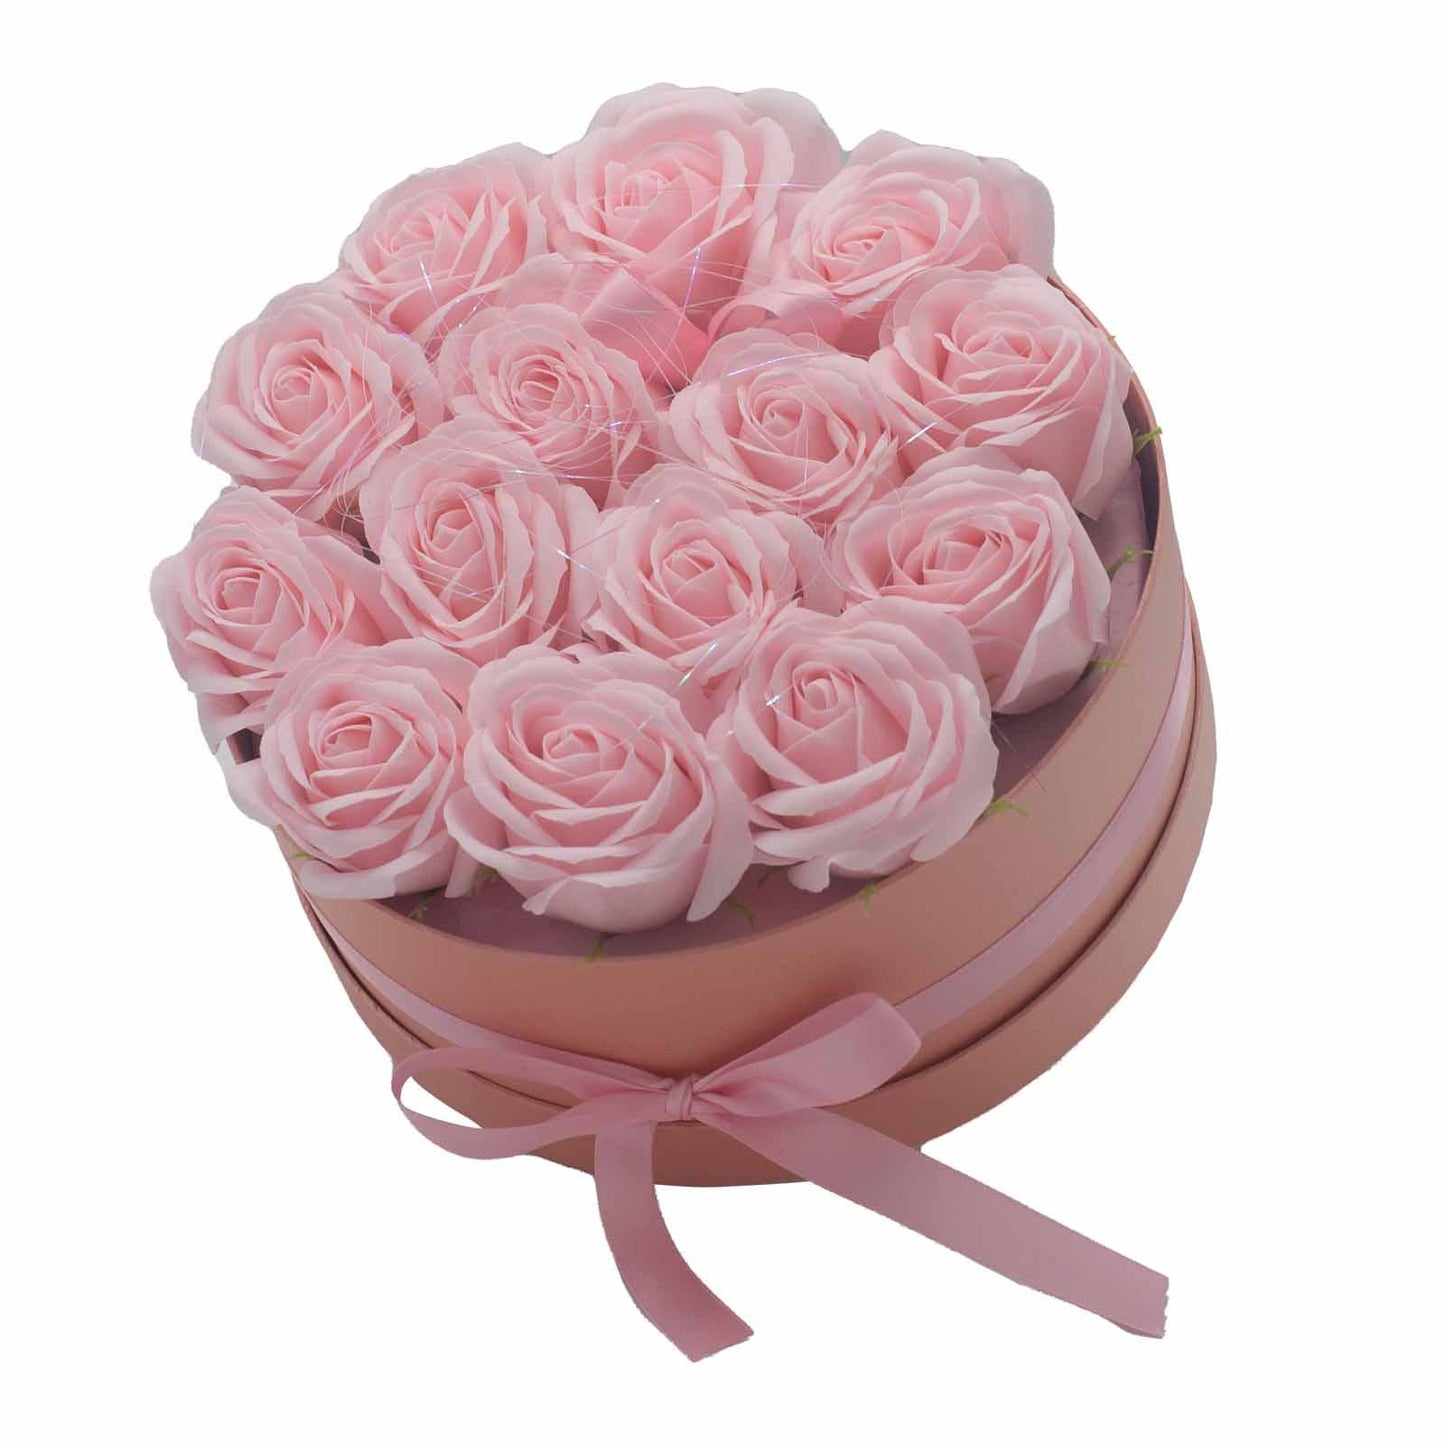 Soap Flower Gift Bouquet - 14 Pink Roses - Round - DuvetDay.co.uk